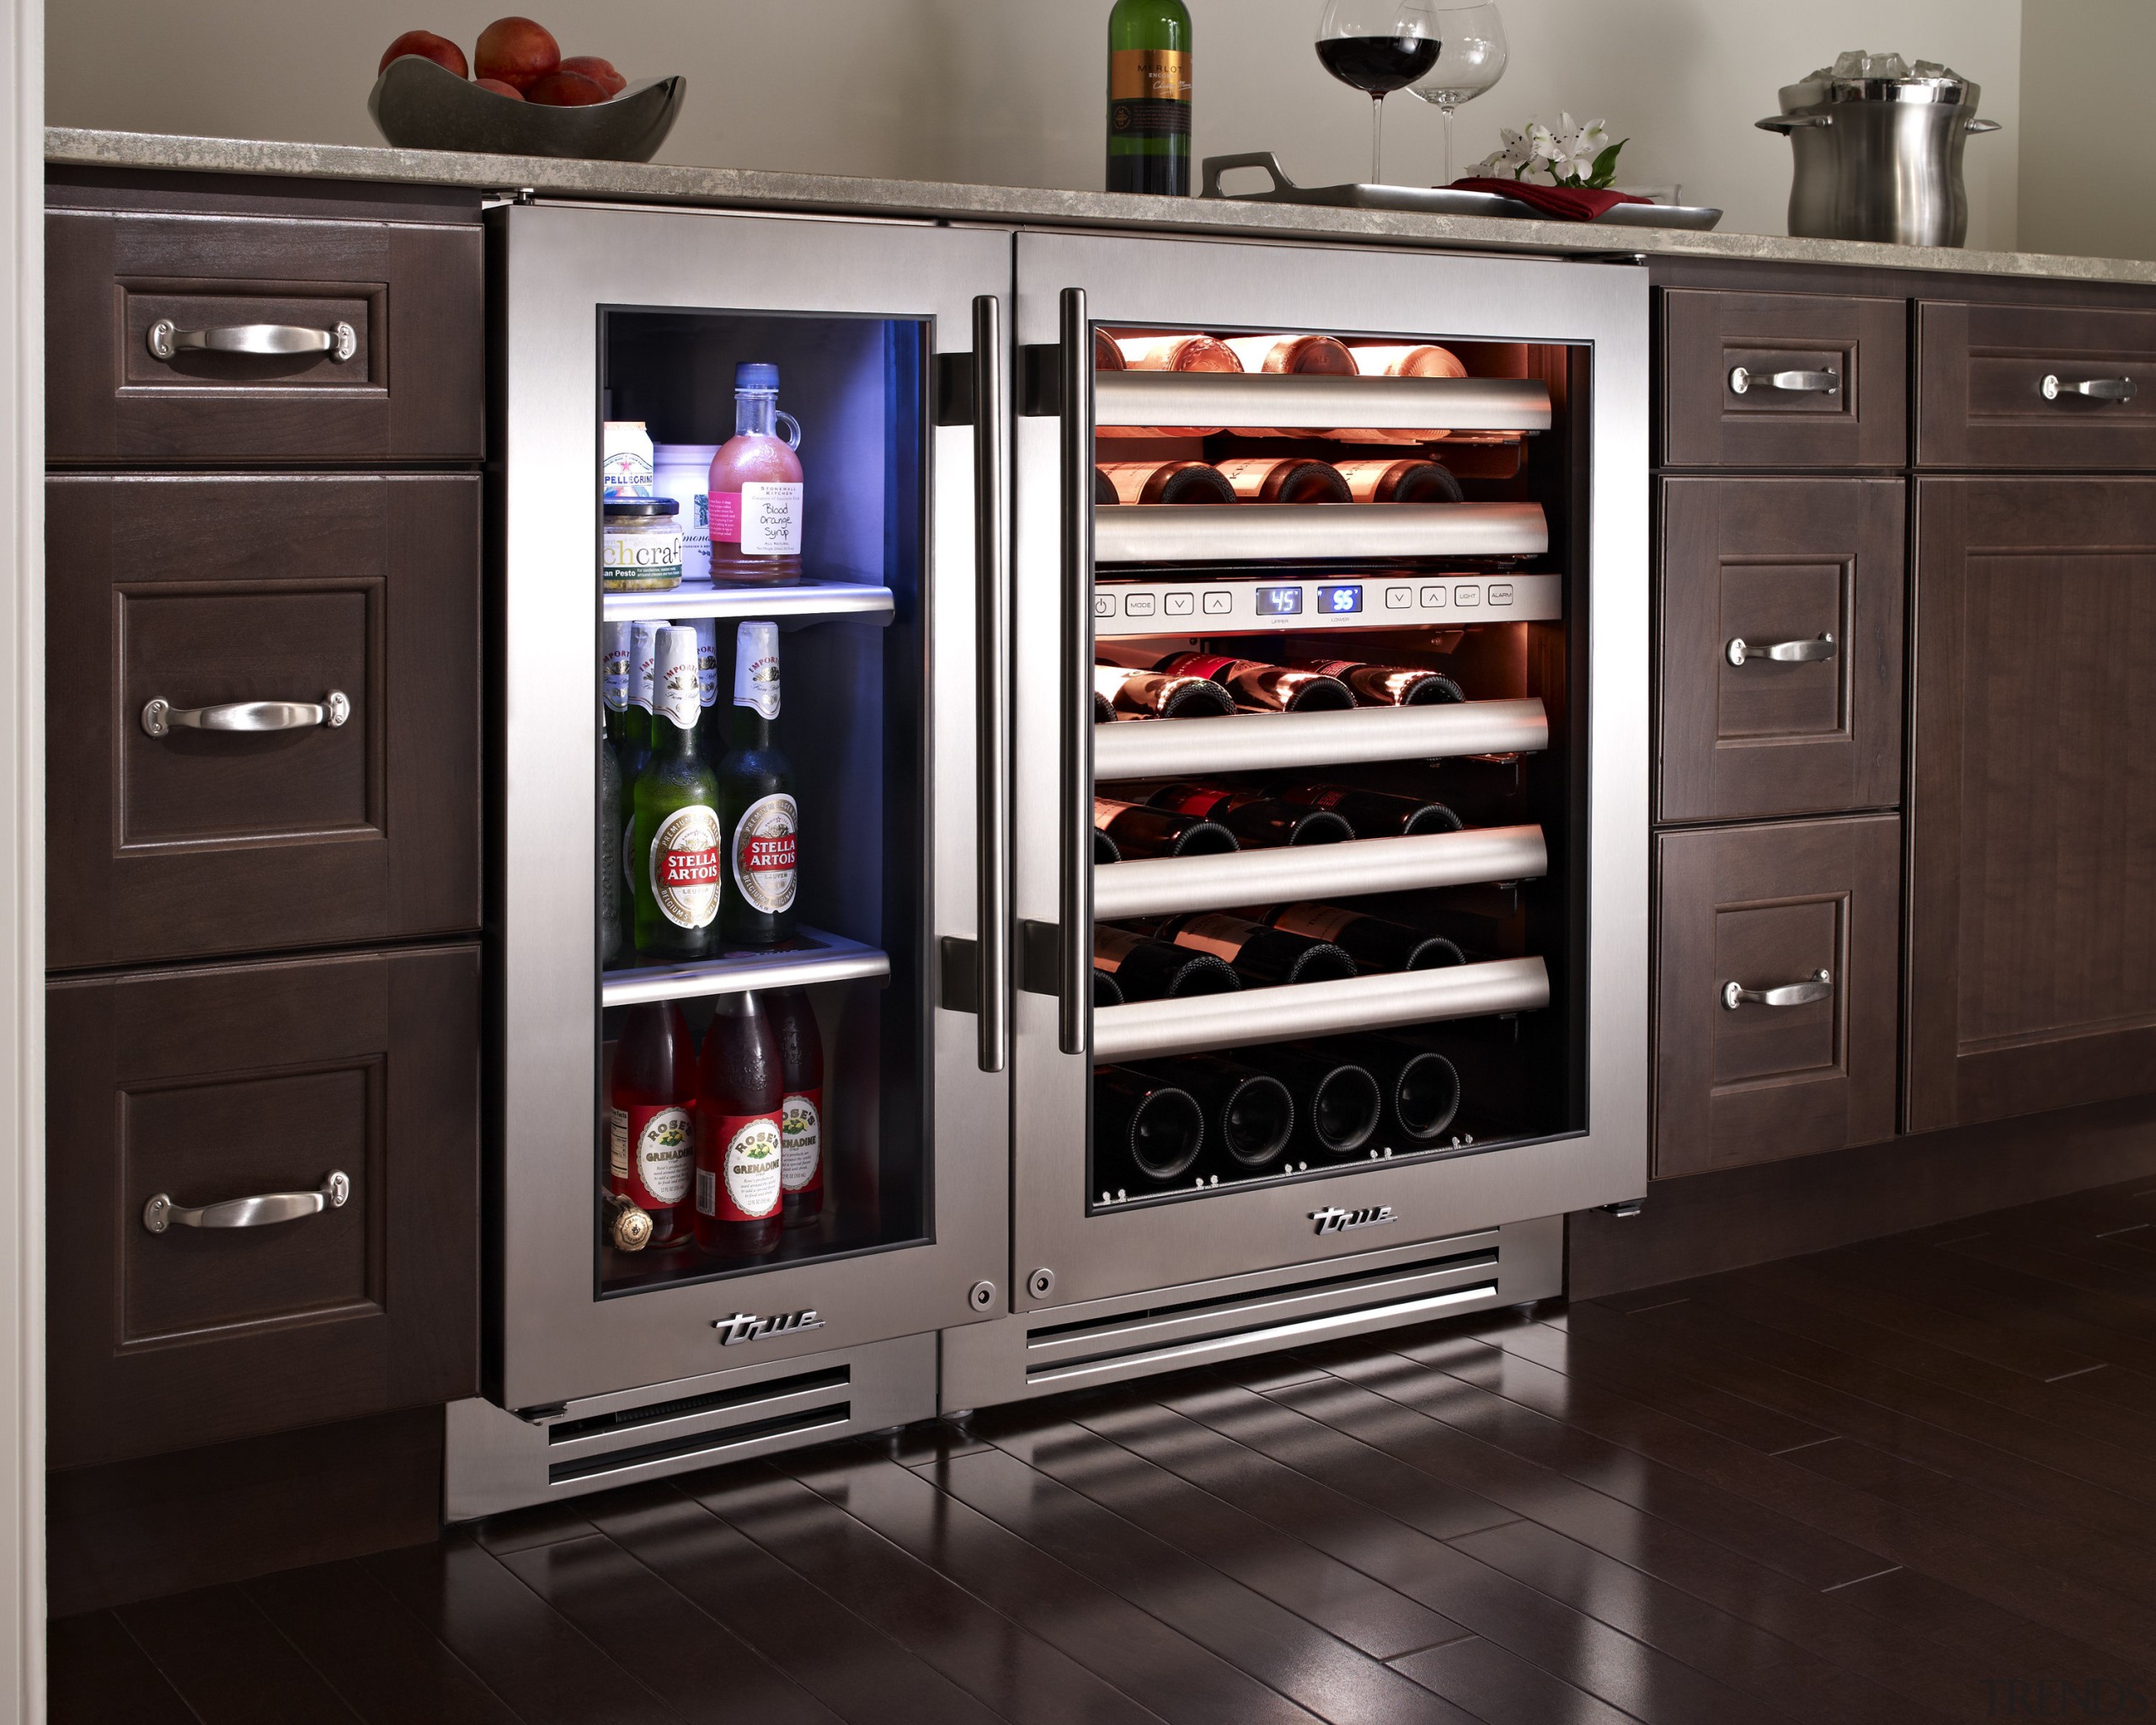 Wine refrigerator from the True Professional Series, a home appliance, kitchen, kitchen appliance, major appliance, refrigerator, black